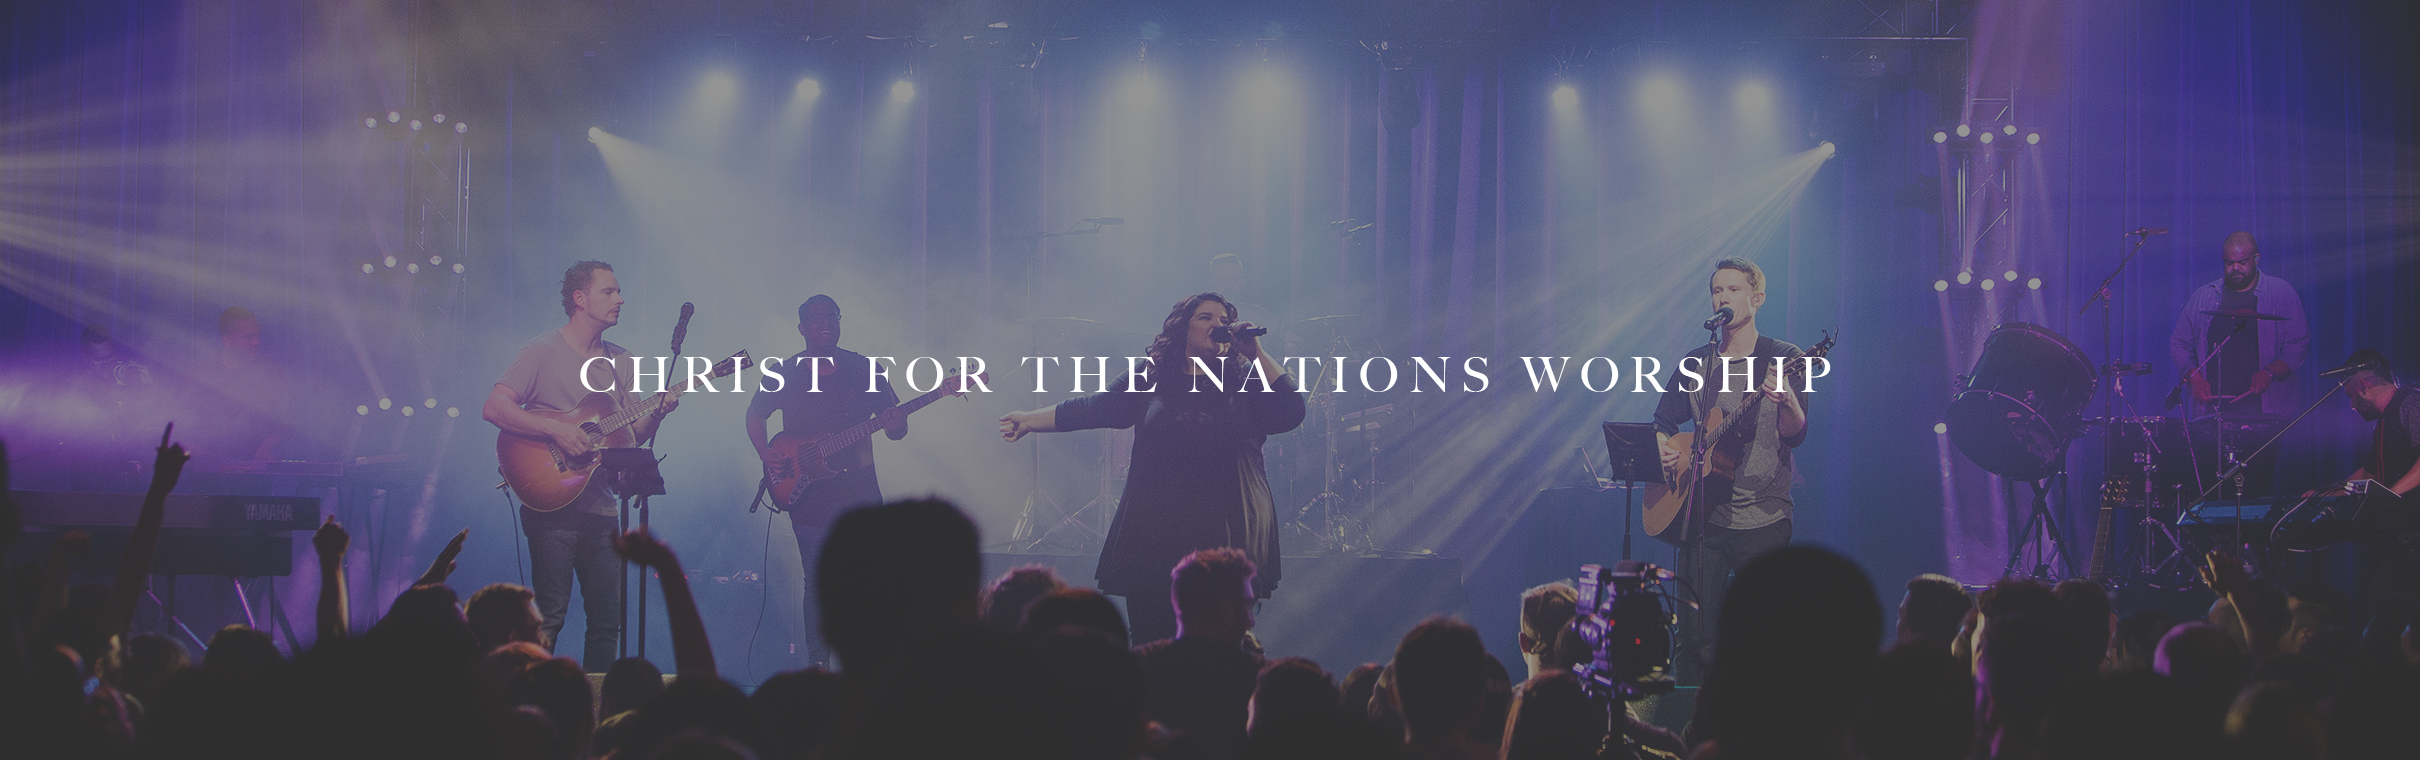 Christ for the Nations Worship